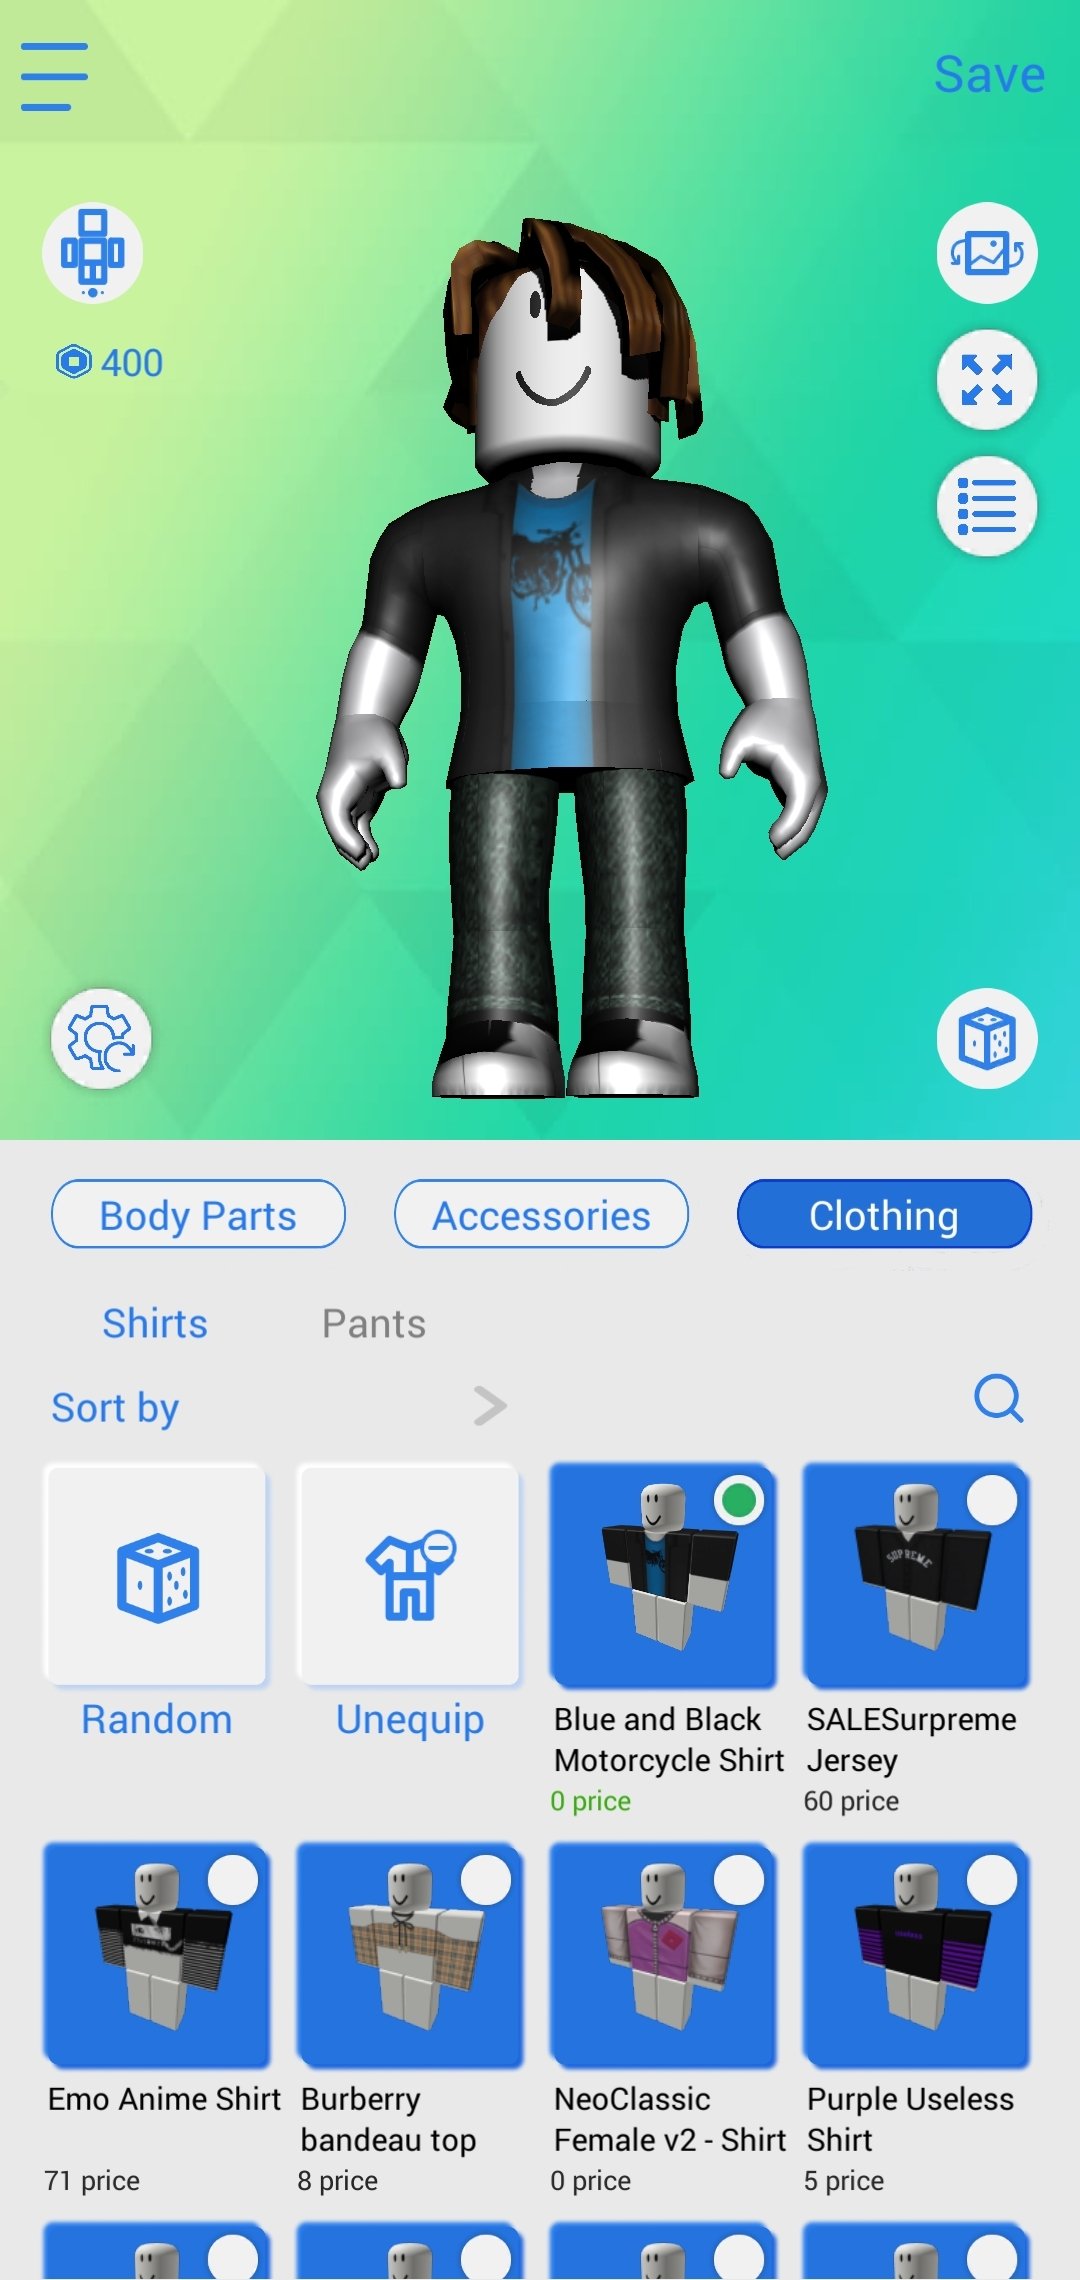 Download Skins Master For Roblox on PC (Emulator) - LDPlayer